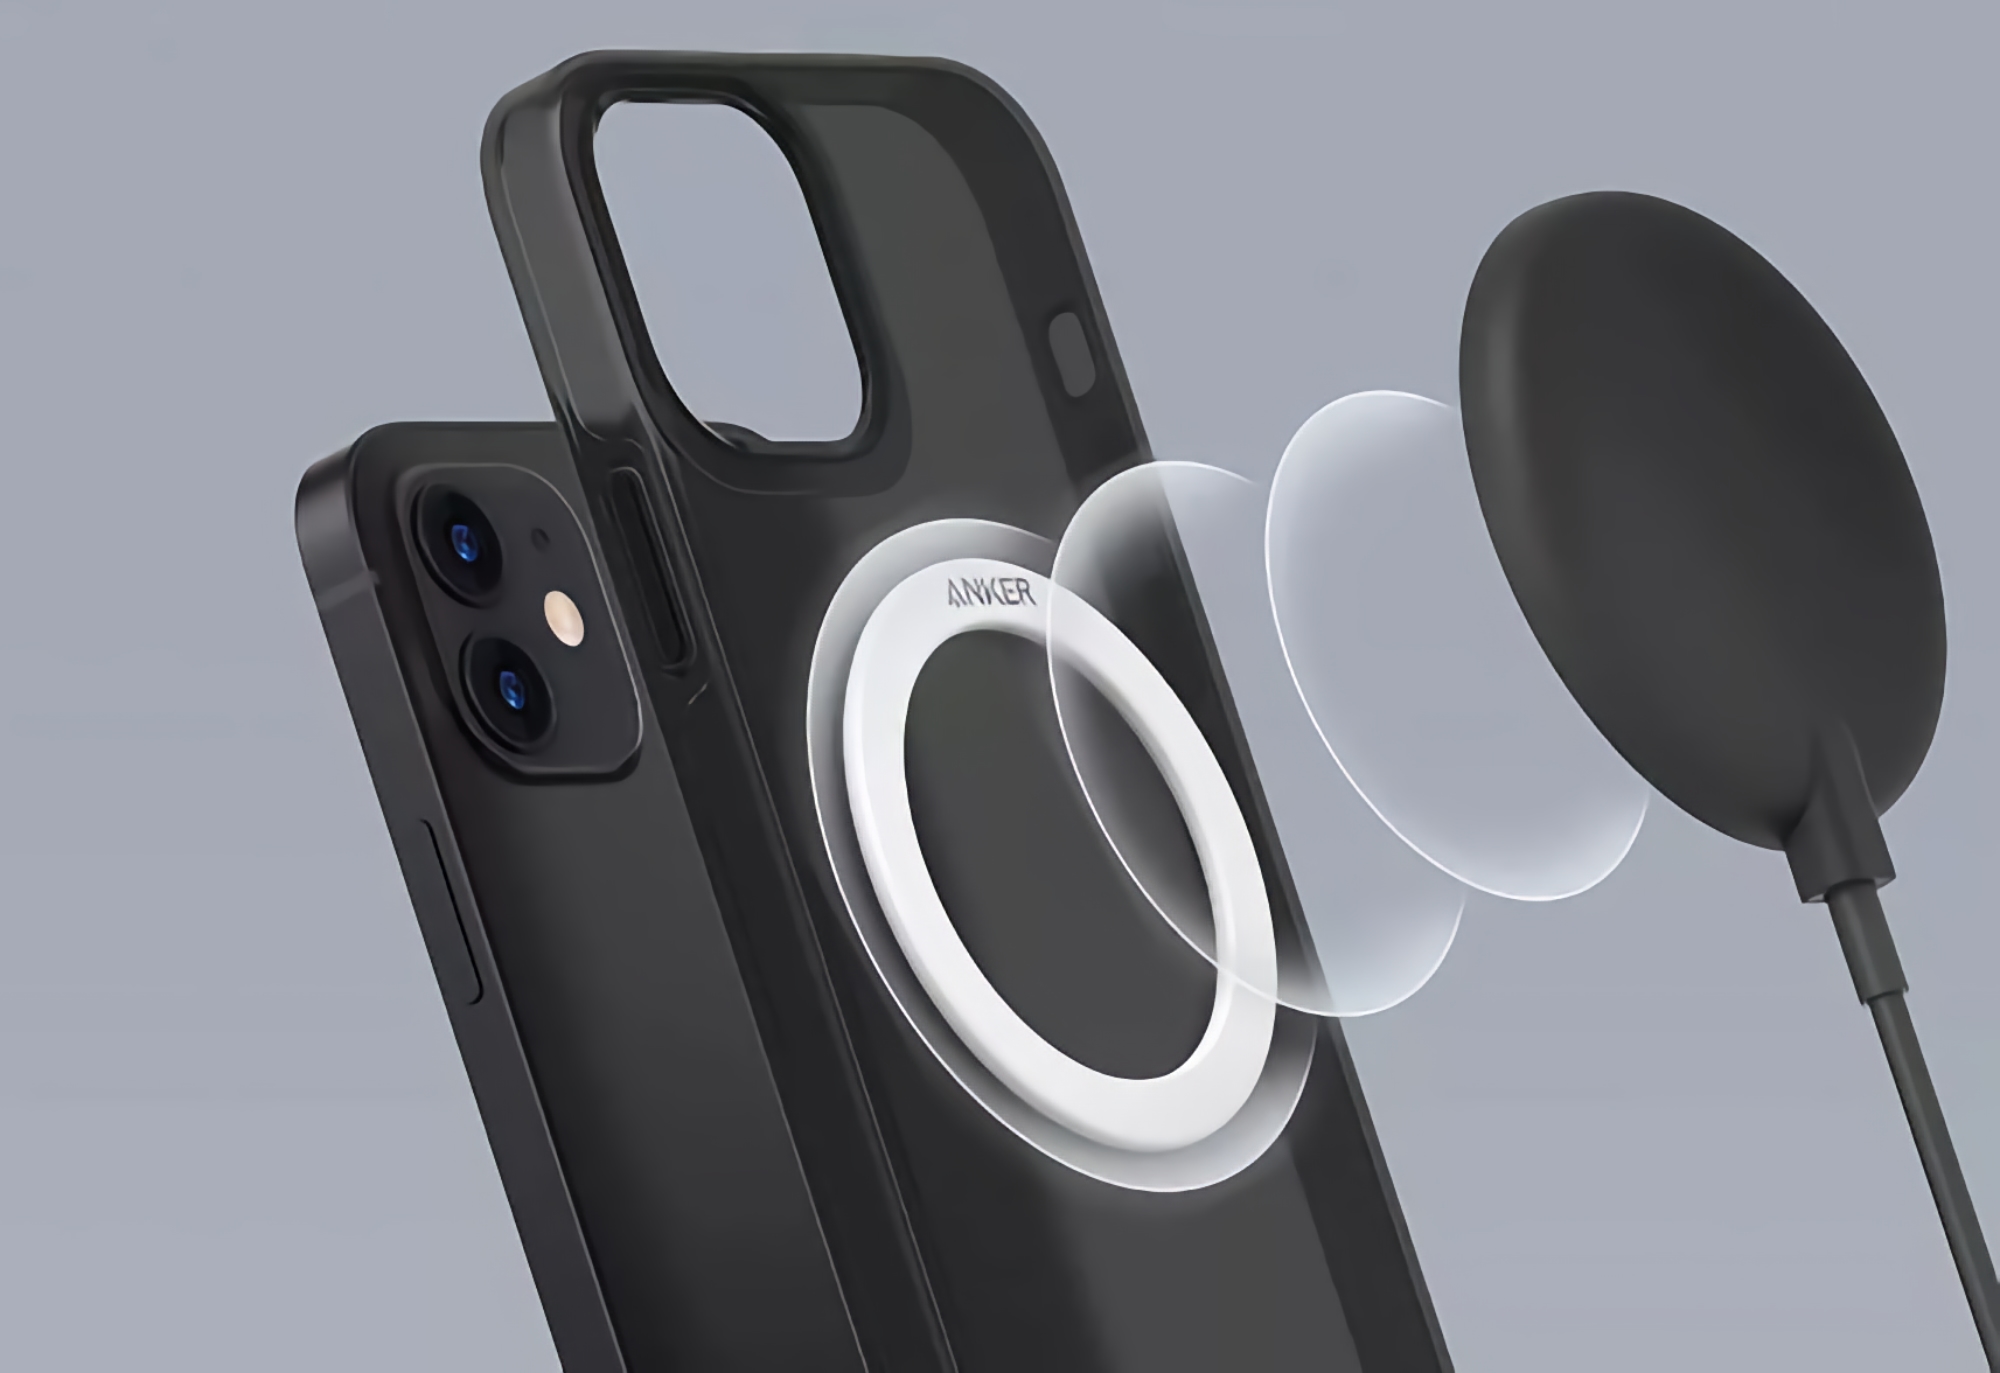 Anker 310 Magnetic Ring: an accessory that adds MagSafe support to any iPhone 12 and iPhone 13 case